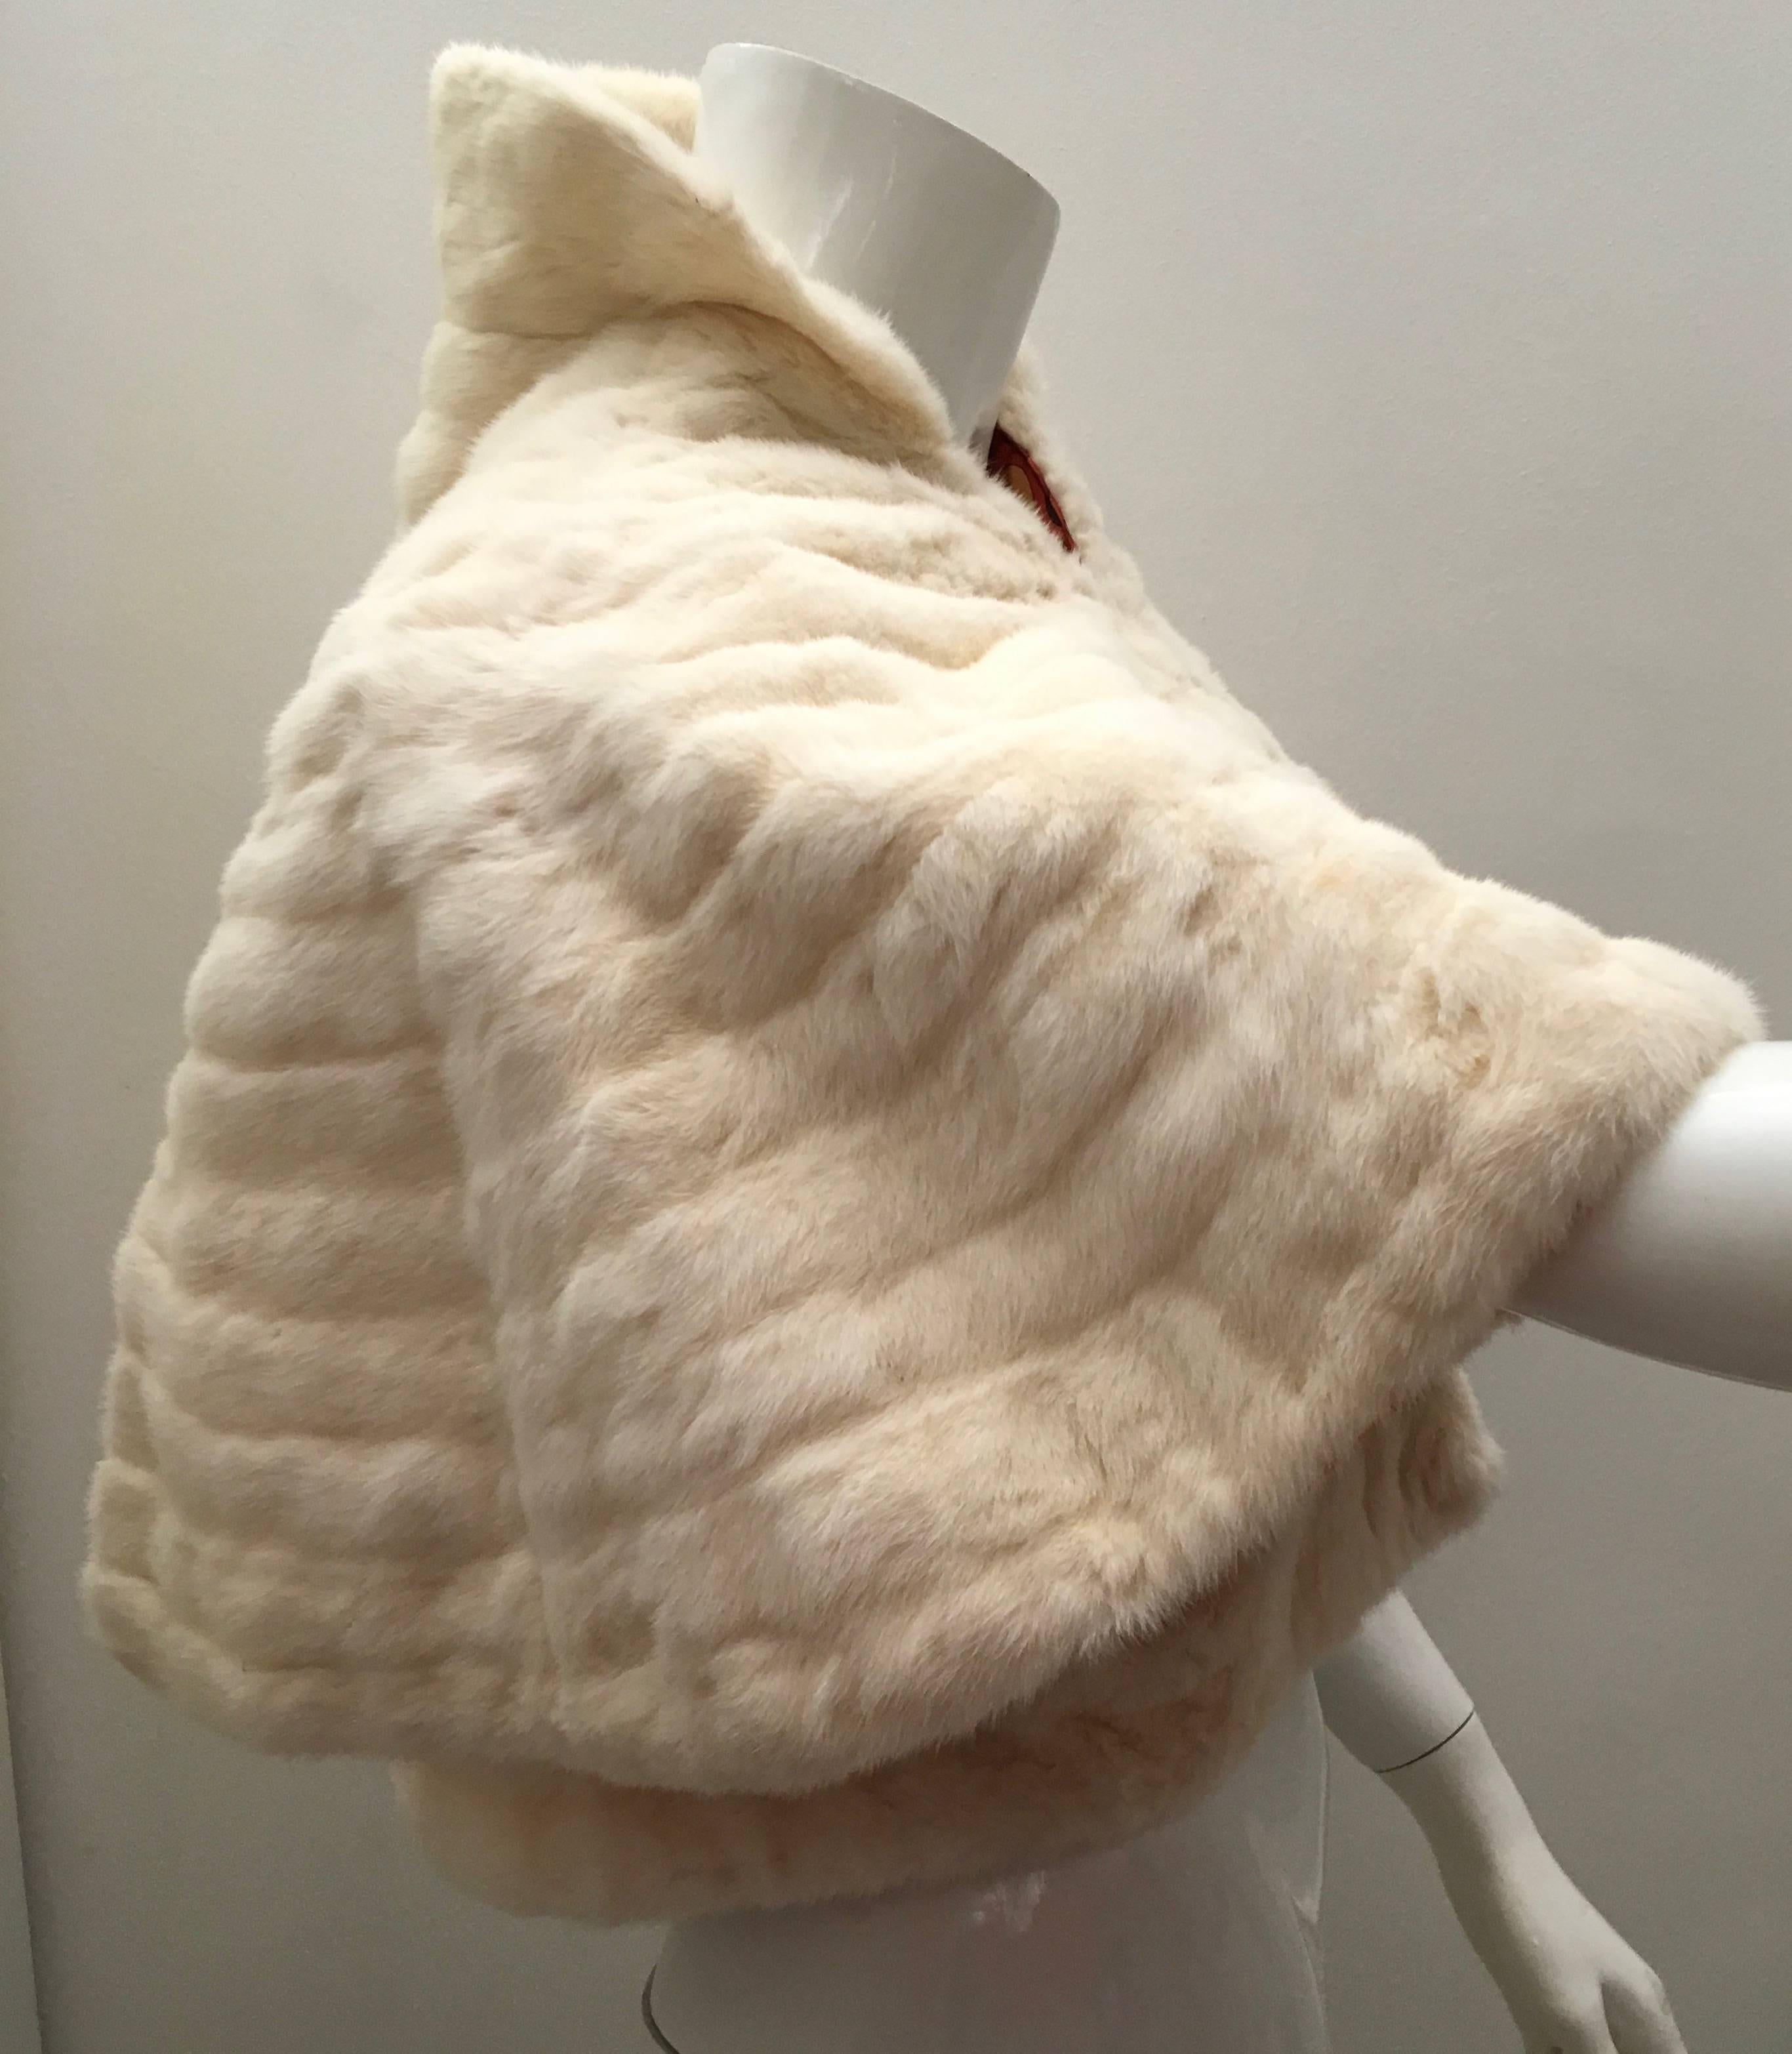 Presented here is a rare mint condition white ermine fur swing jacket from the 1950's. This magnificent short swing jacket is unlike anything you've ever seen. The label is the fabulous P. Baril furrier company of Nice, Paris and Monaco since 1900